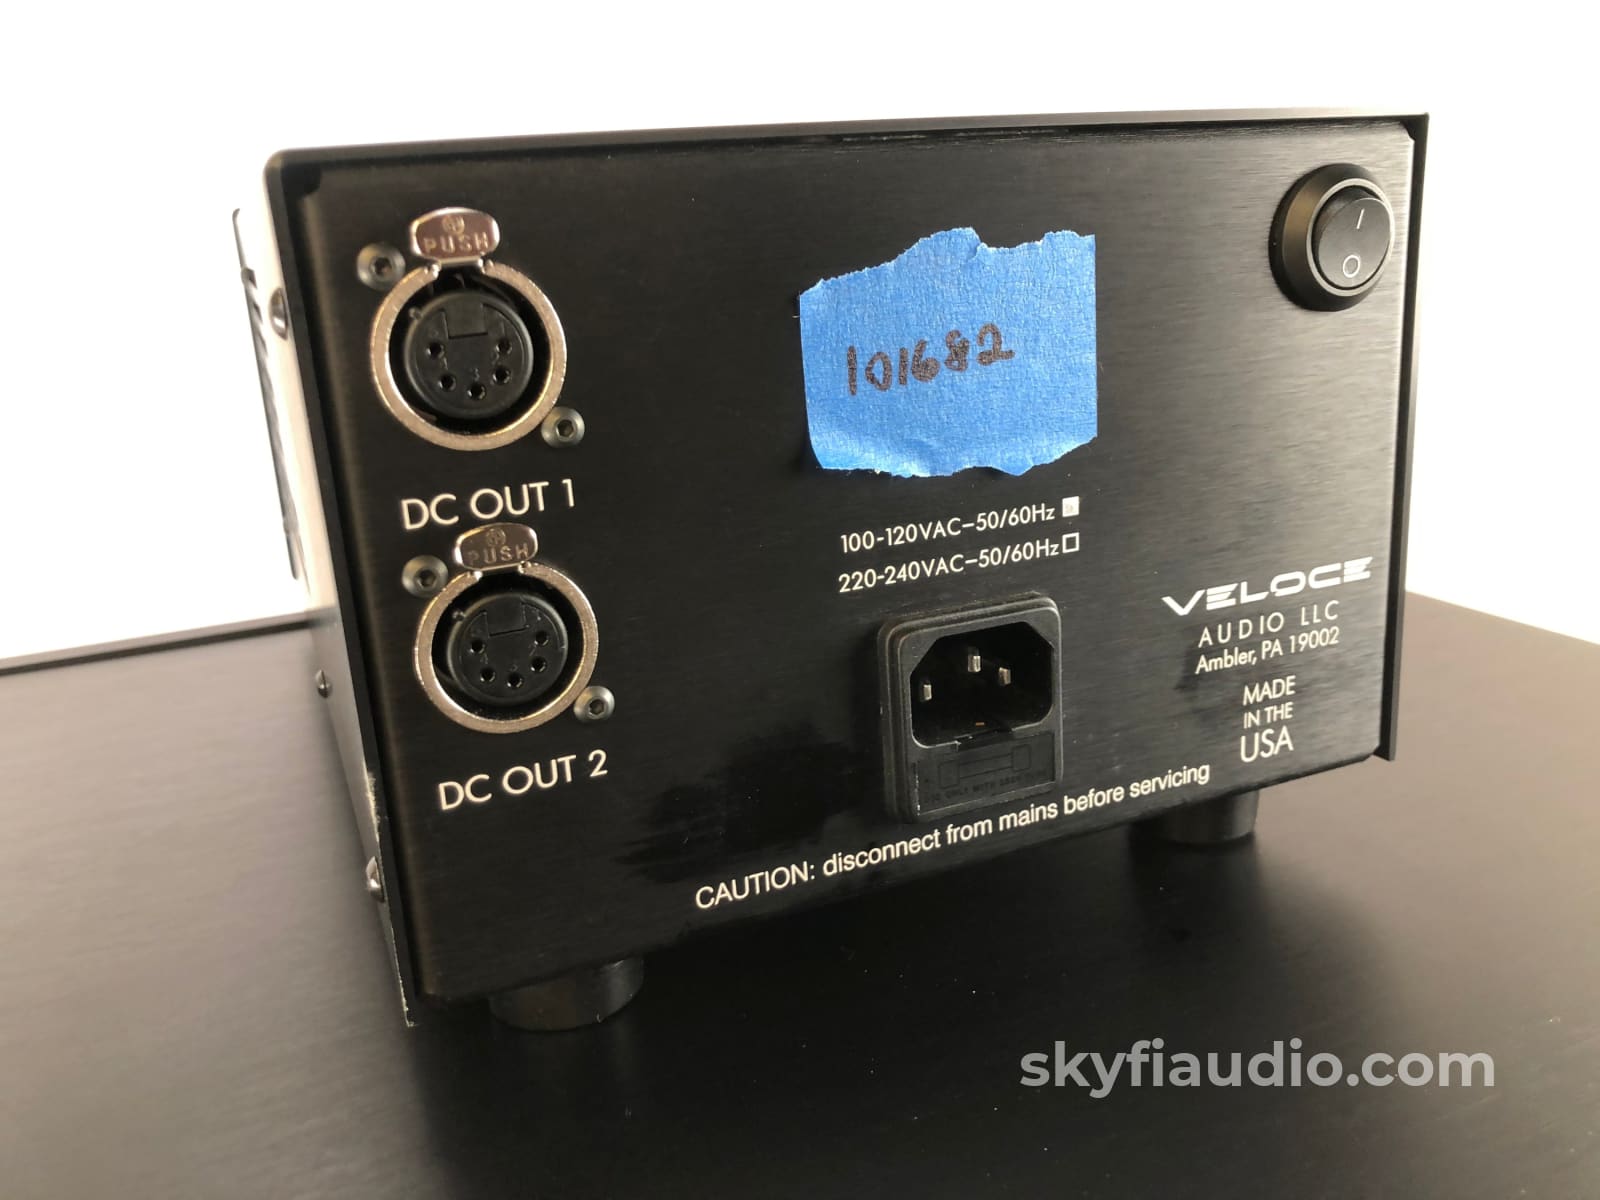 Veloce Audio - Lithio Series Ls-1 Line Stage Tube Preamplifier With Smartsupply Battery Power